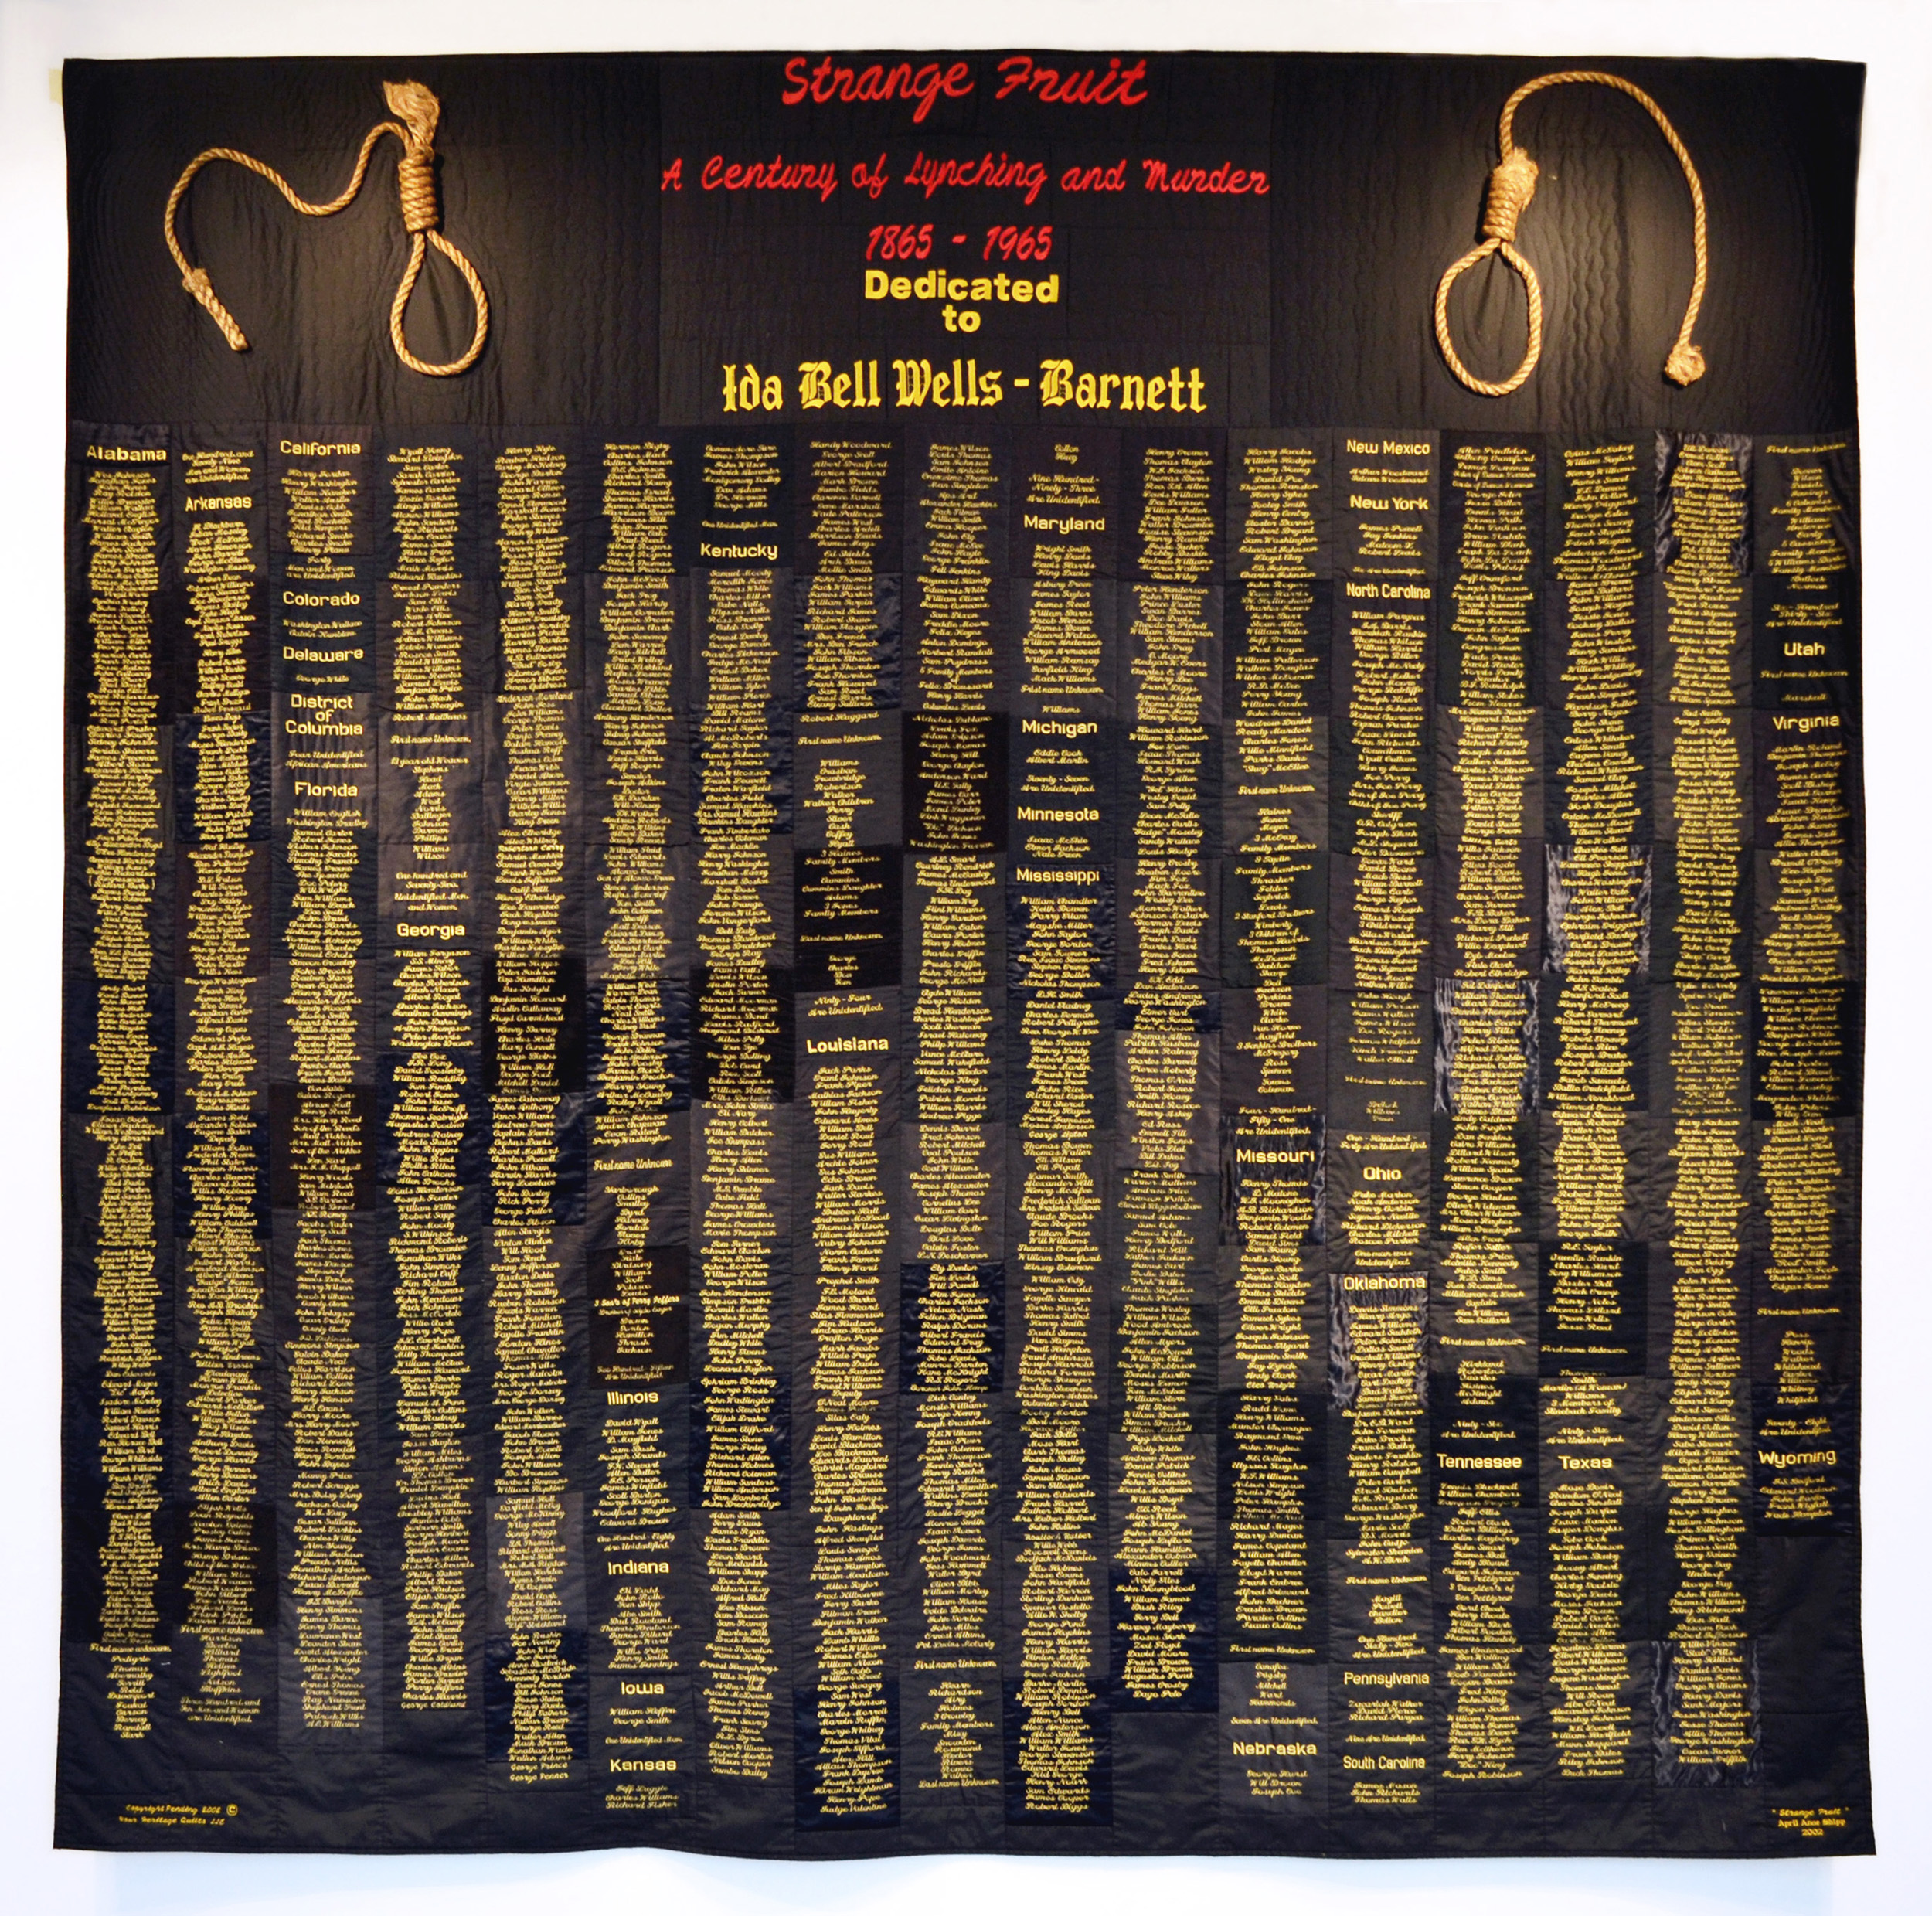 Cropped gallery shot of "Strange Fruit" by April Shipp, Just Injust 2021. Names of lynching victims from1865 to 1965 embroidered in gold on large black quilt with nooses attached to top two corners.